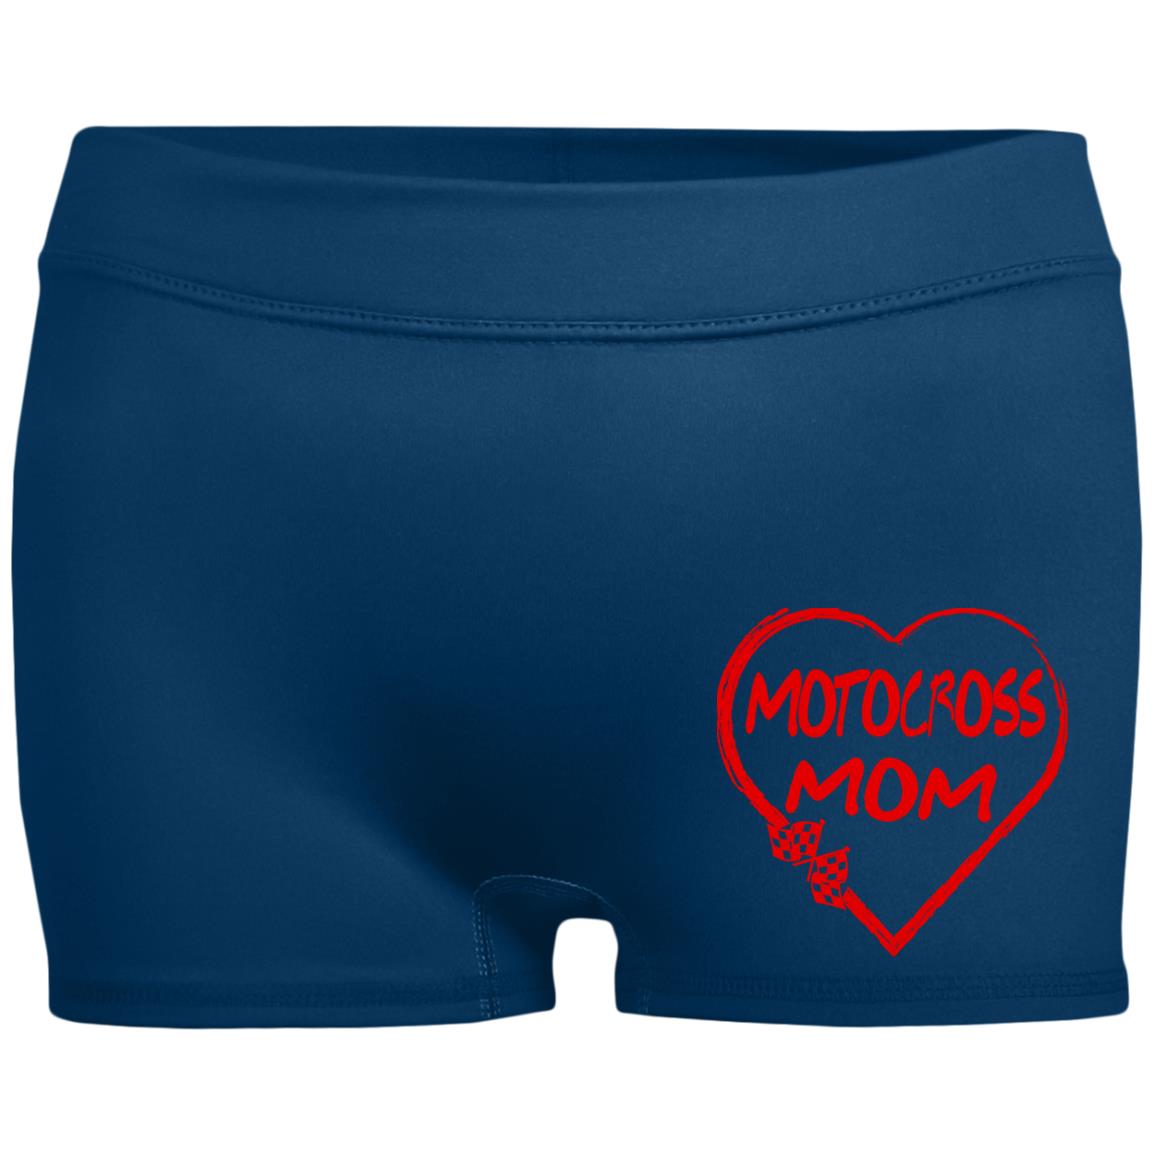 Motocross Mom Heart Ladies' Fitted Moisture-Wicking 2.5 inch Inseam Shorts